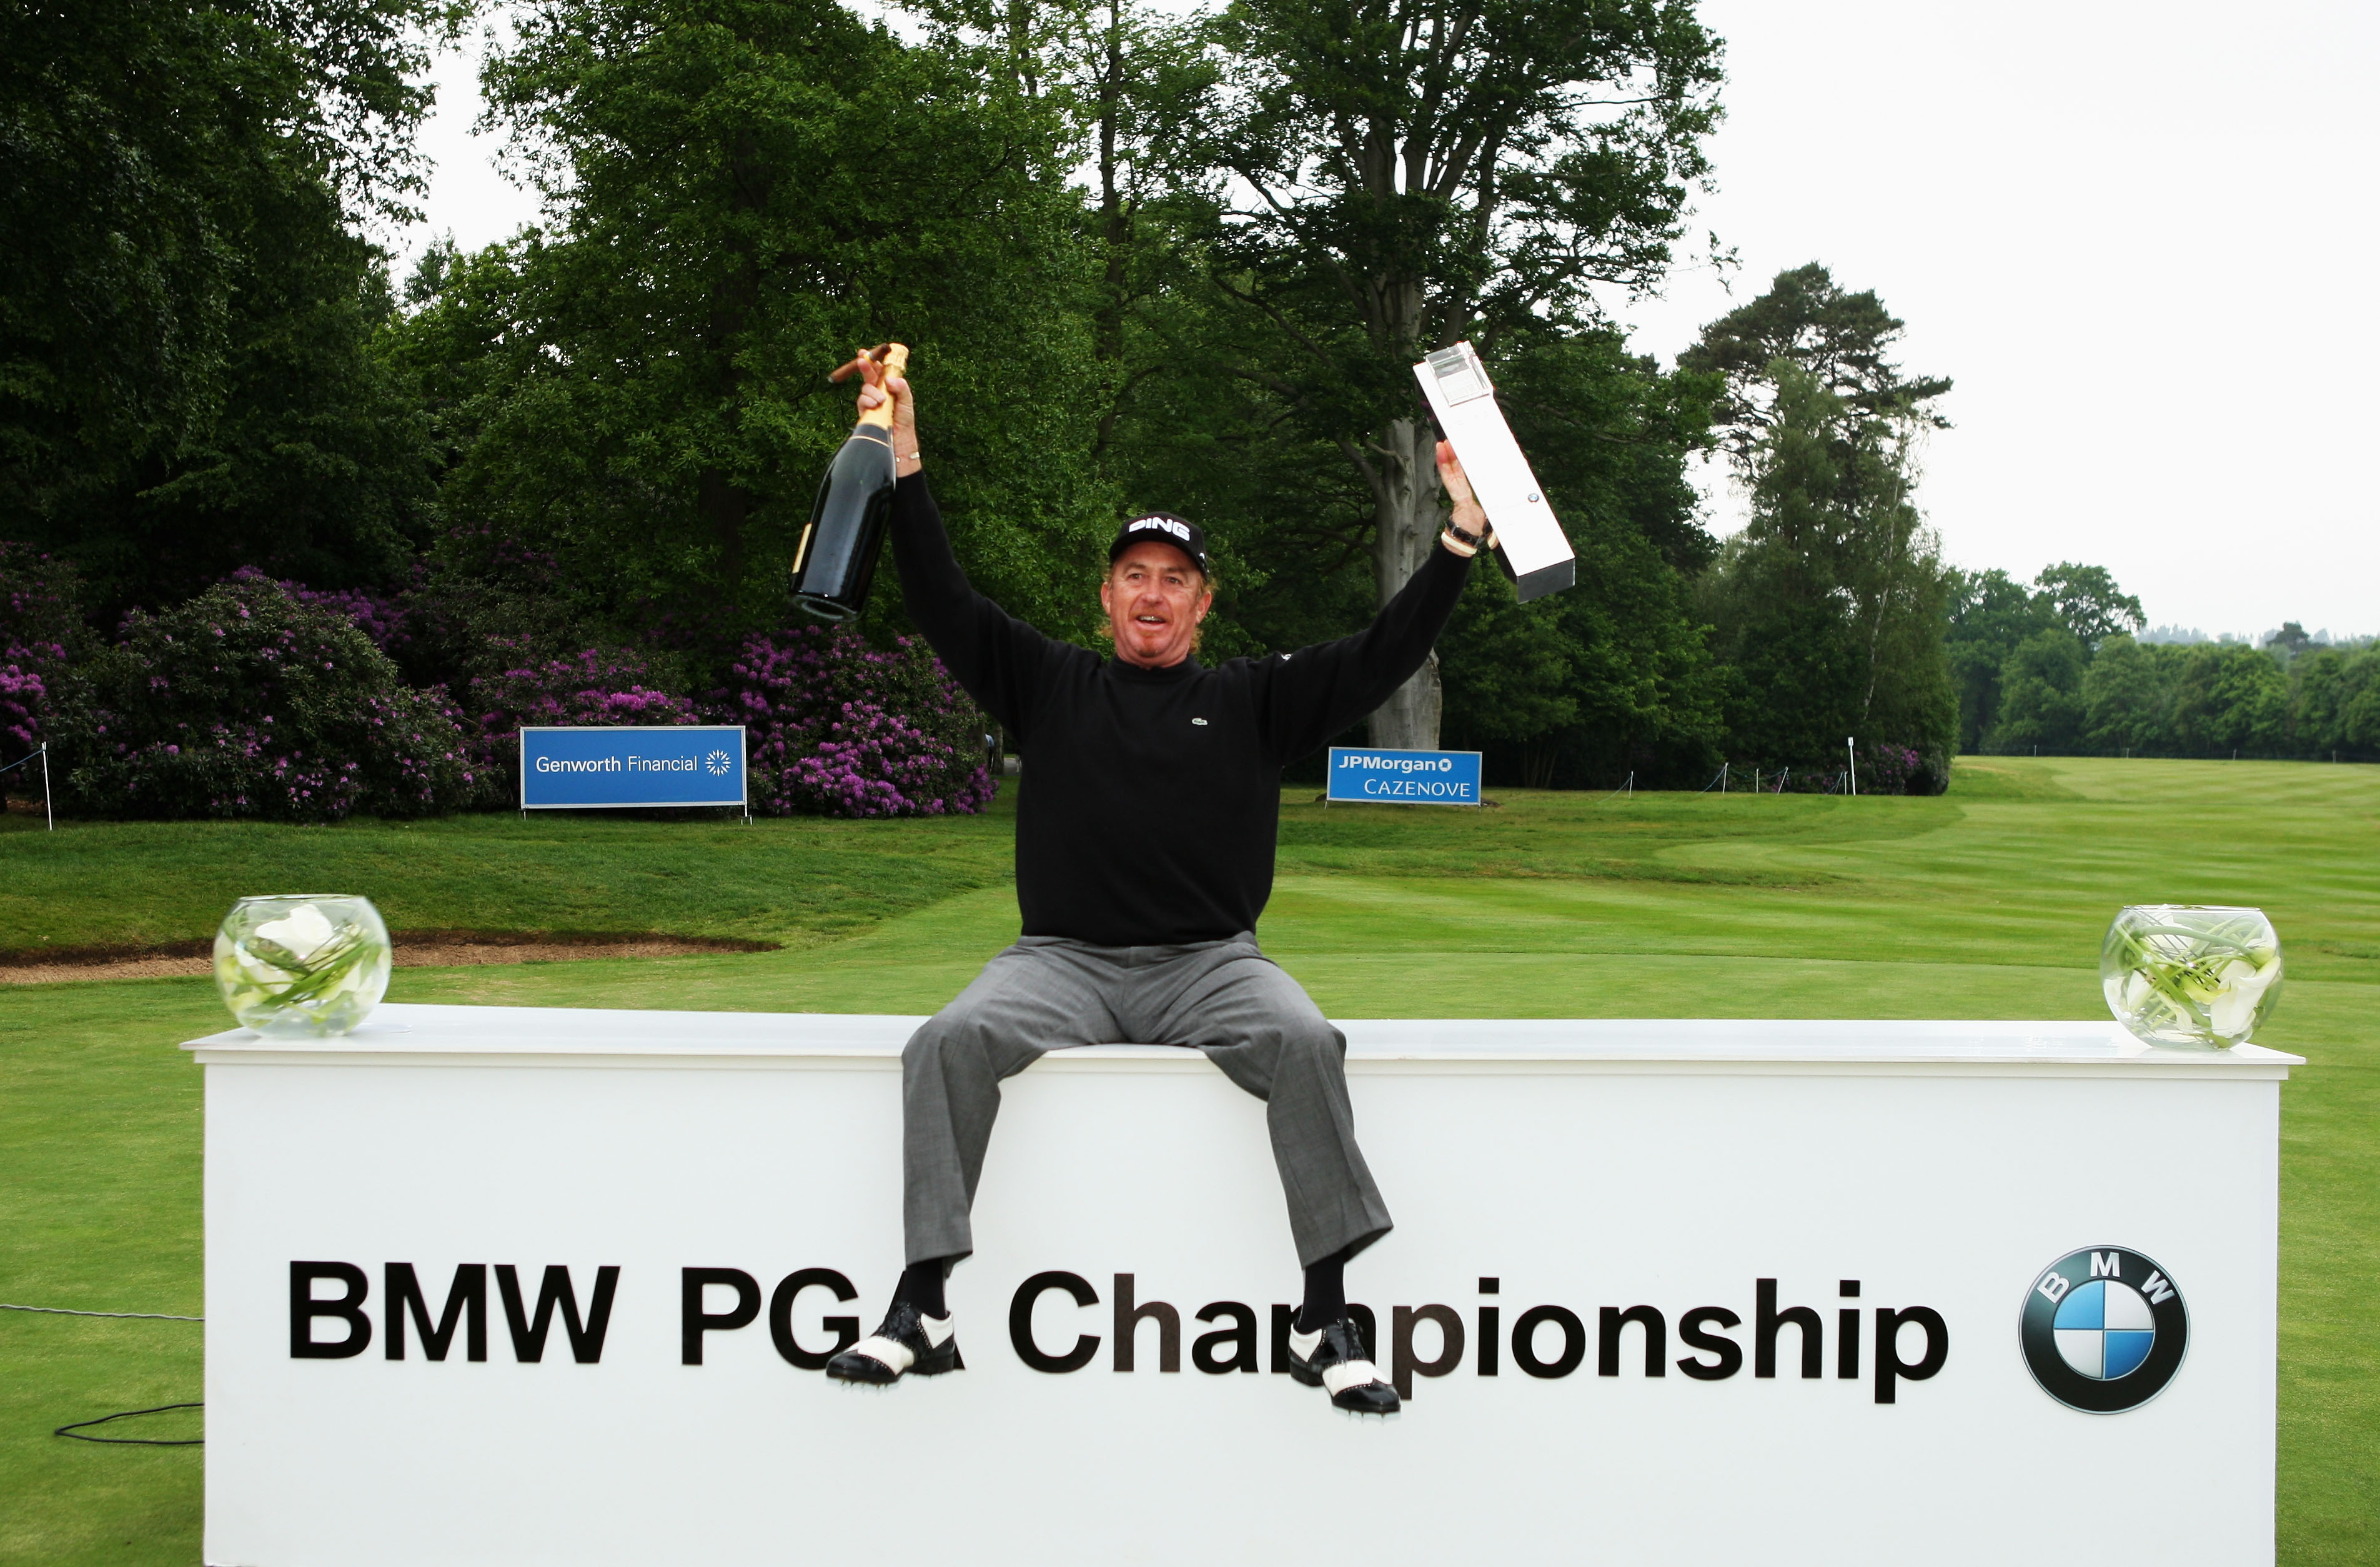 Jimenez aced the 203-yard, par-three fifth hole, hitting a for iron (Photo: Getty Images)